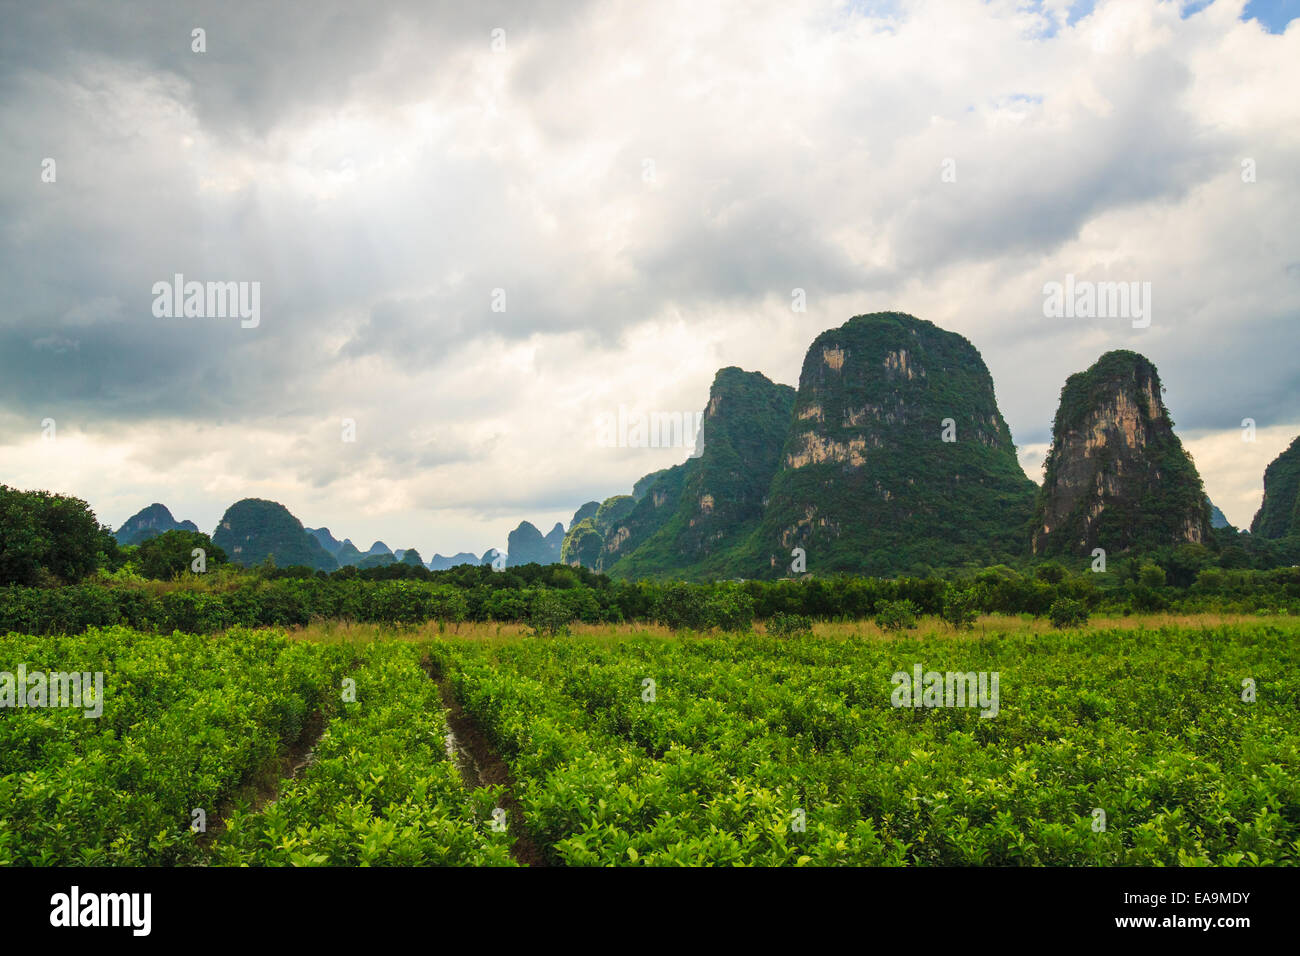 Southern China Landscape High Resolution Stock Photography And Images Alamy